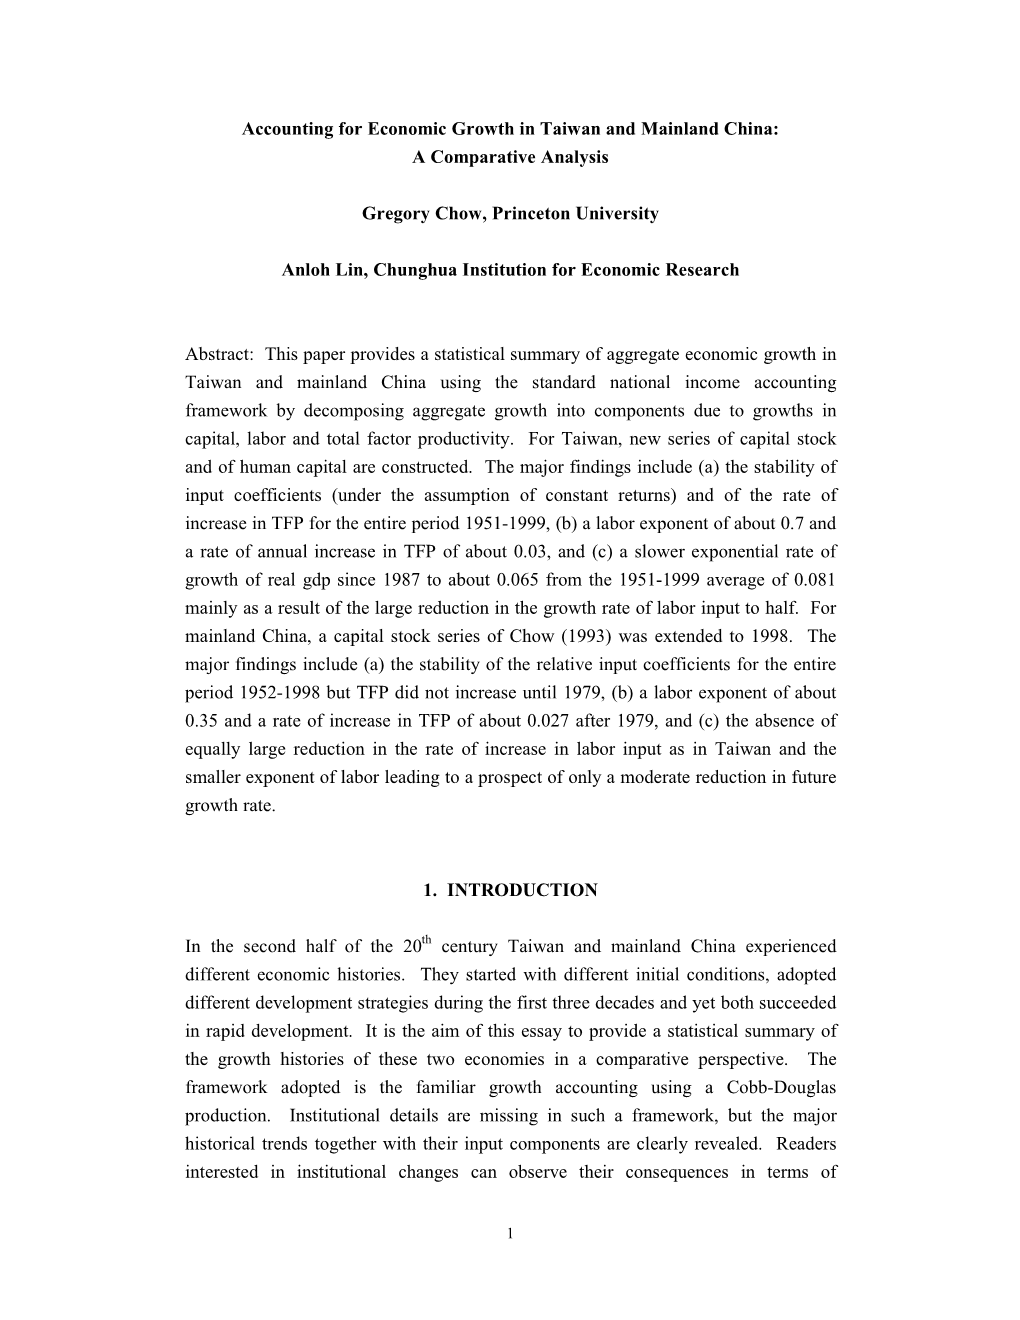 Accounting for Economic Growth in Taiwan and Mainland China: a Comparative Analysis